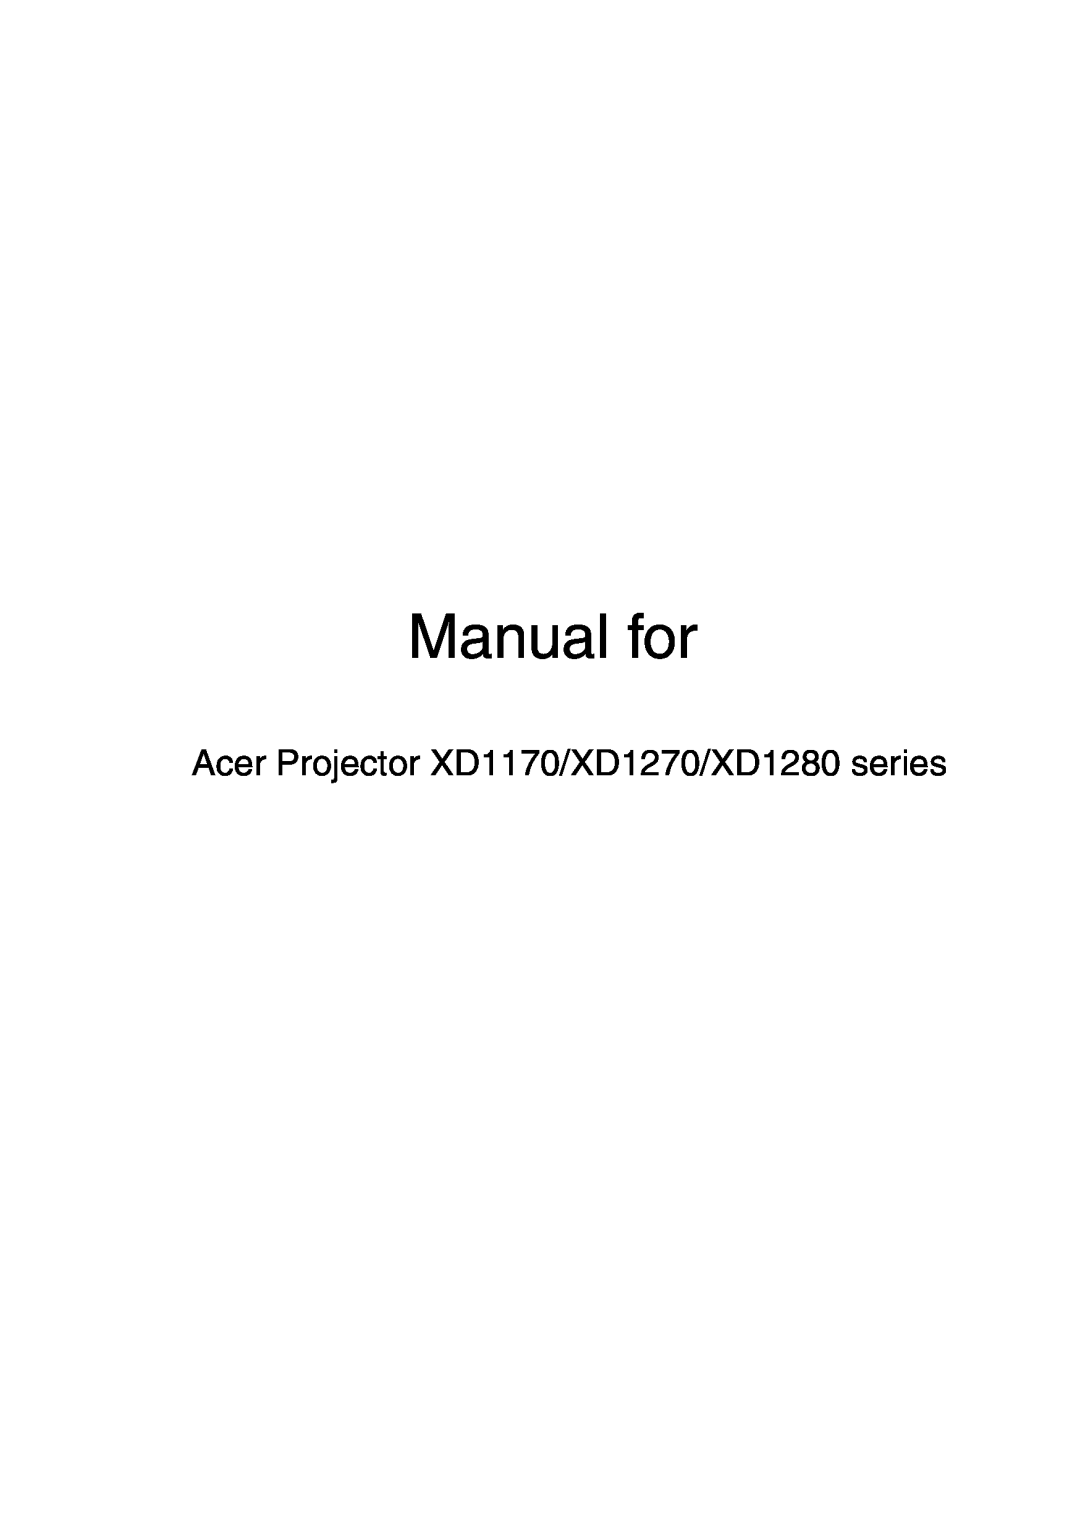 Acer manual Manual for, Acer Projector XD1170/XD1270/XD1280 series 